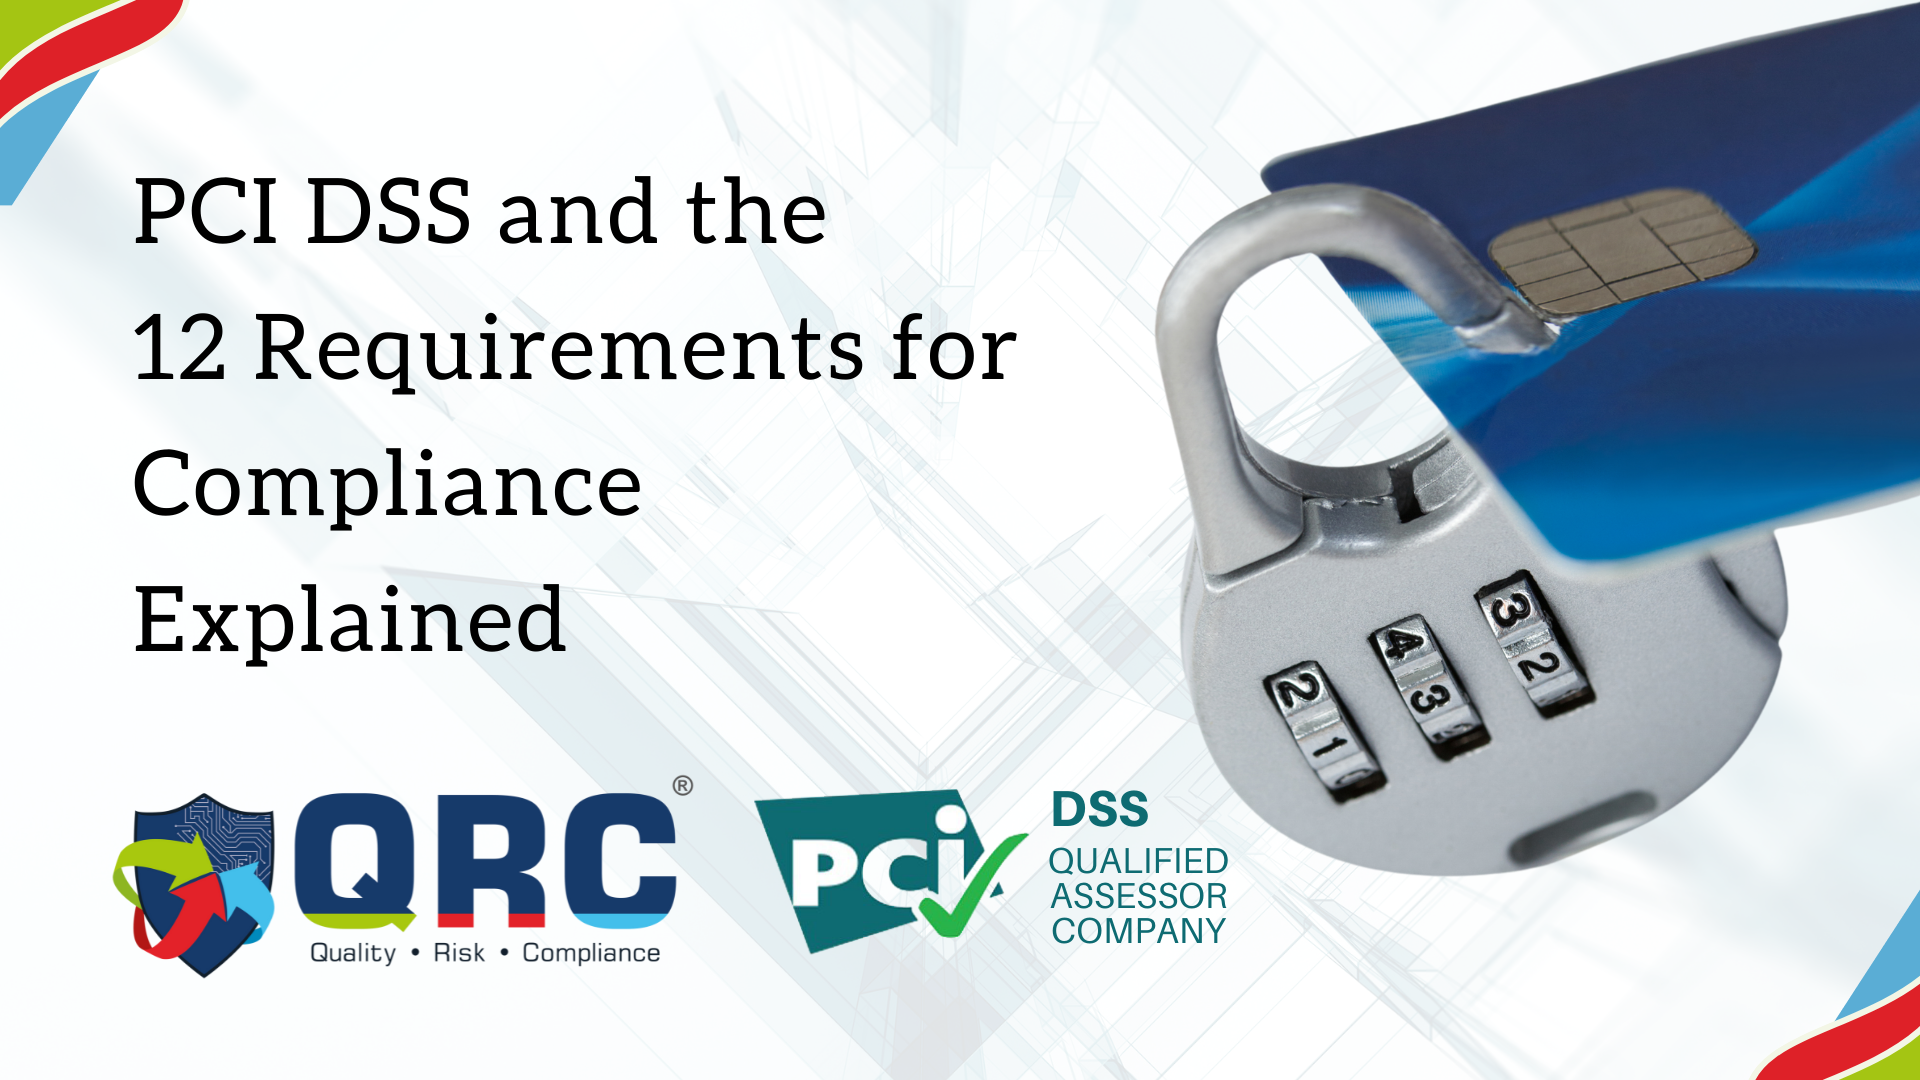 12 requirements of the PCI DSS Compliance